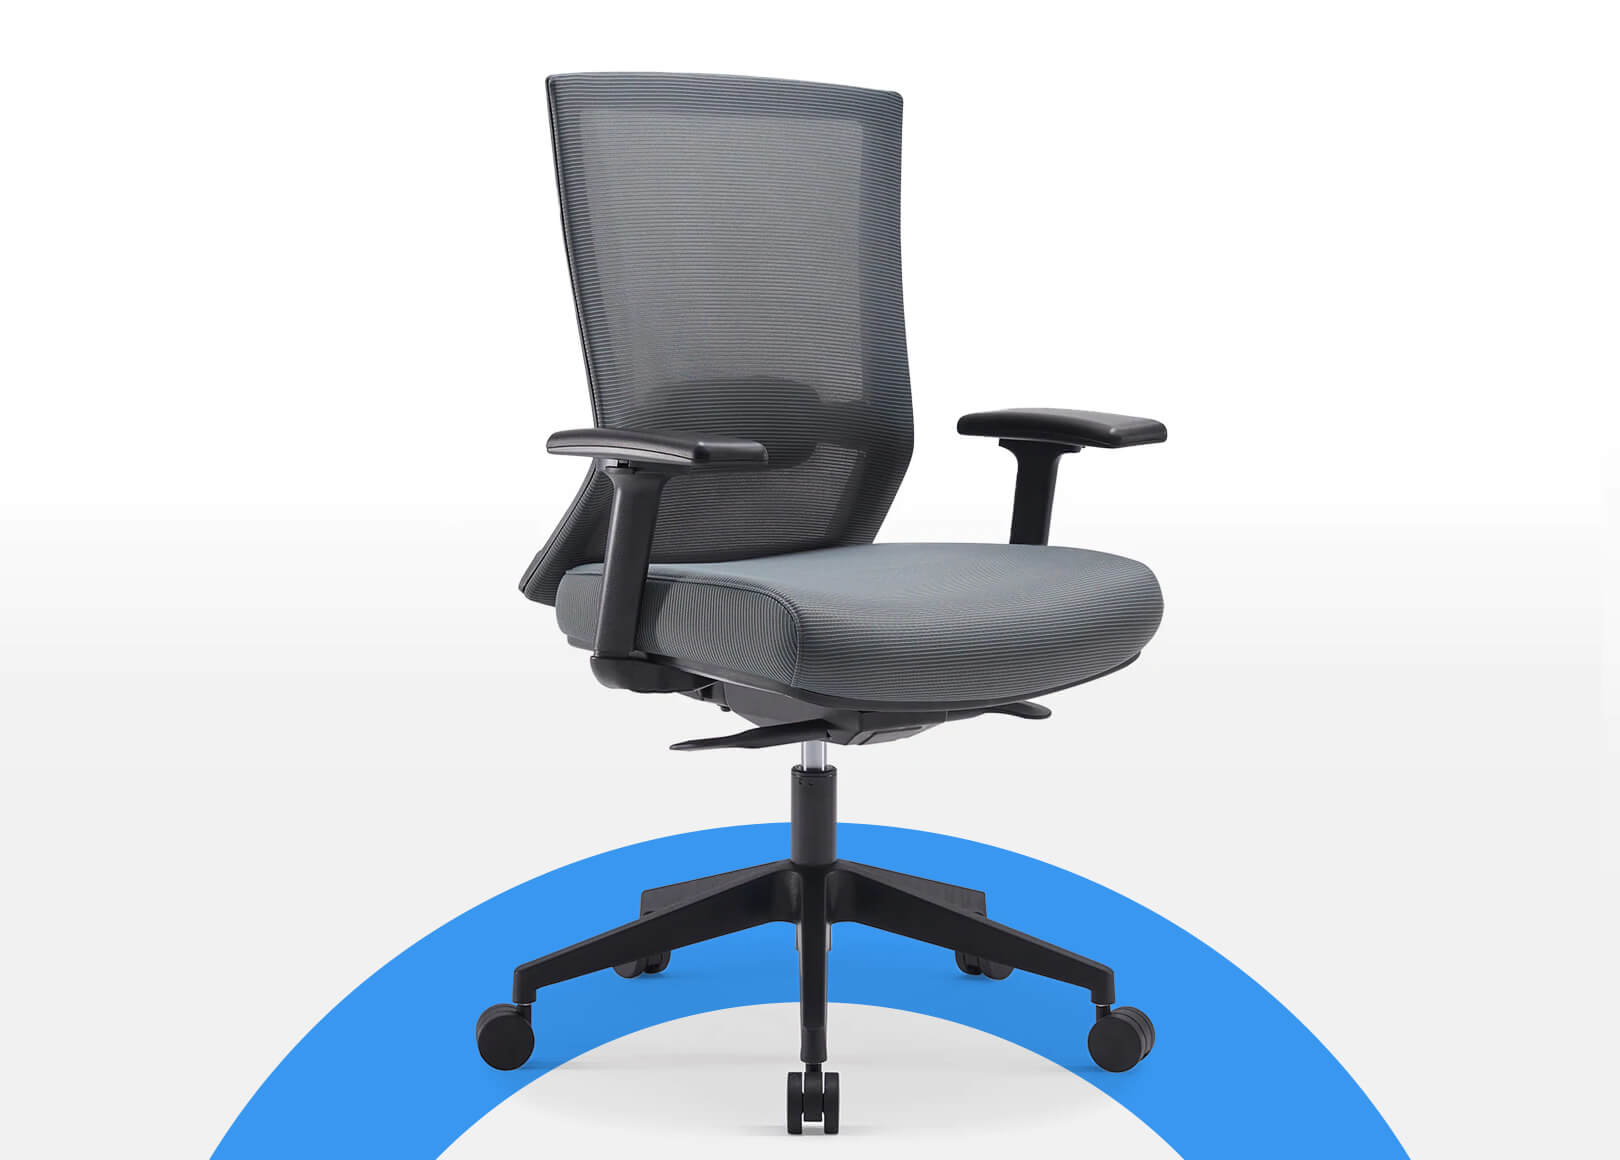 Grey Elite67 ergonomic office chair with breathable mesh back, adjustable features, and thick seat padding for all-day comfort and support.